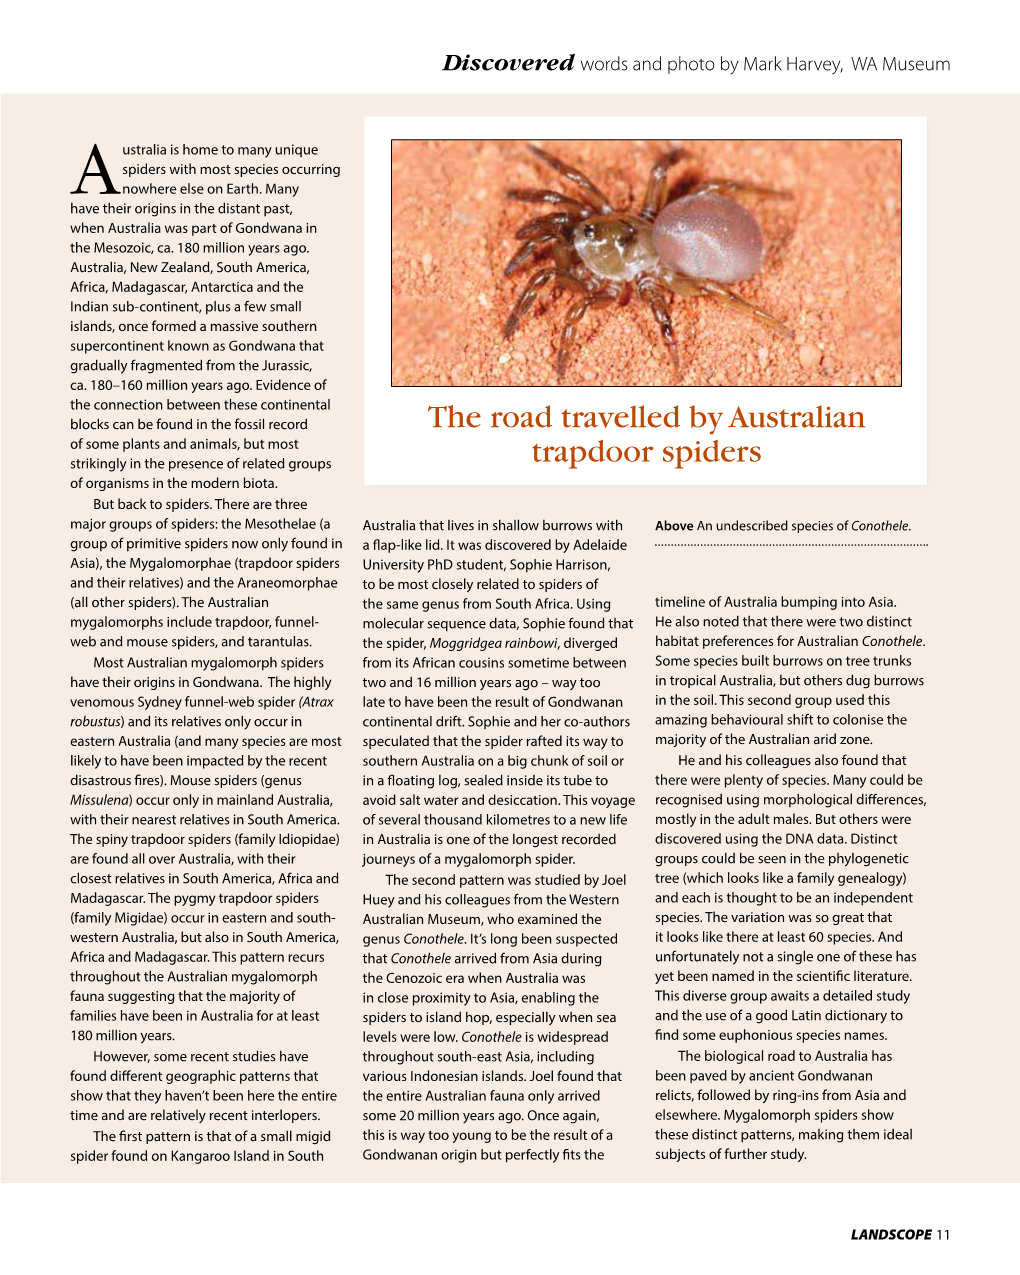 The Road Travelled by Australian Trapdoor Spiders